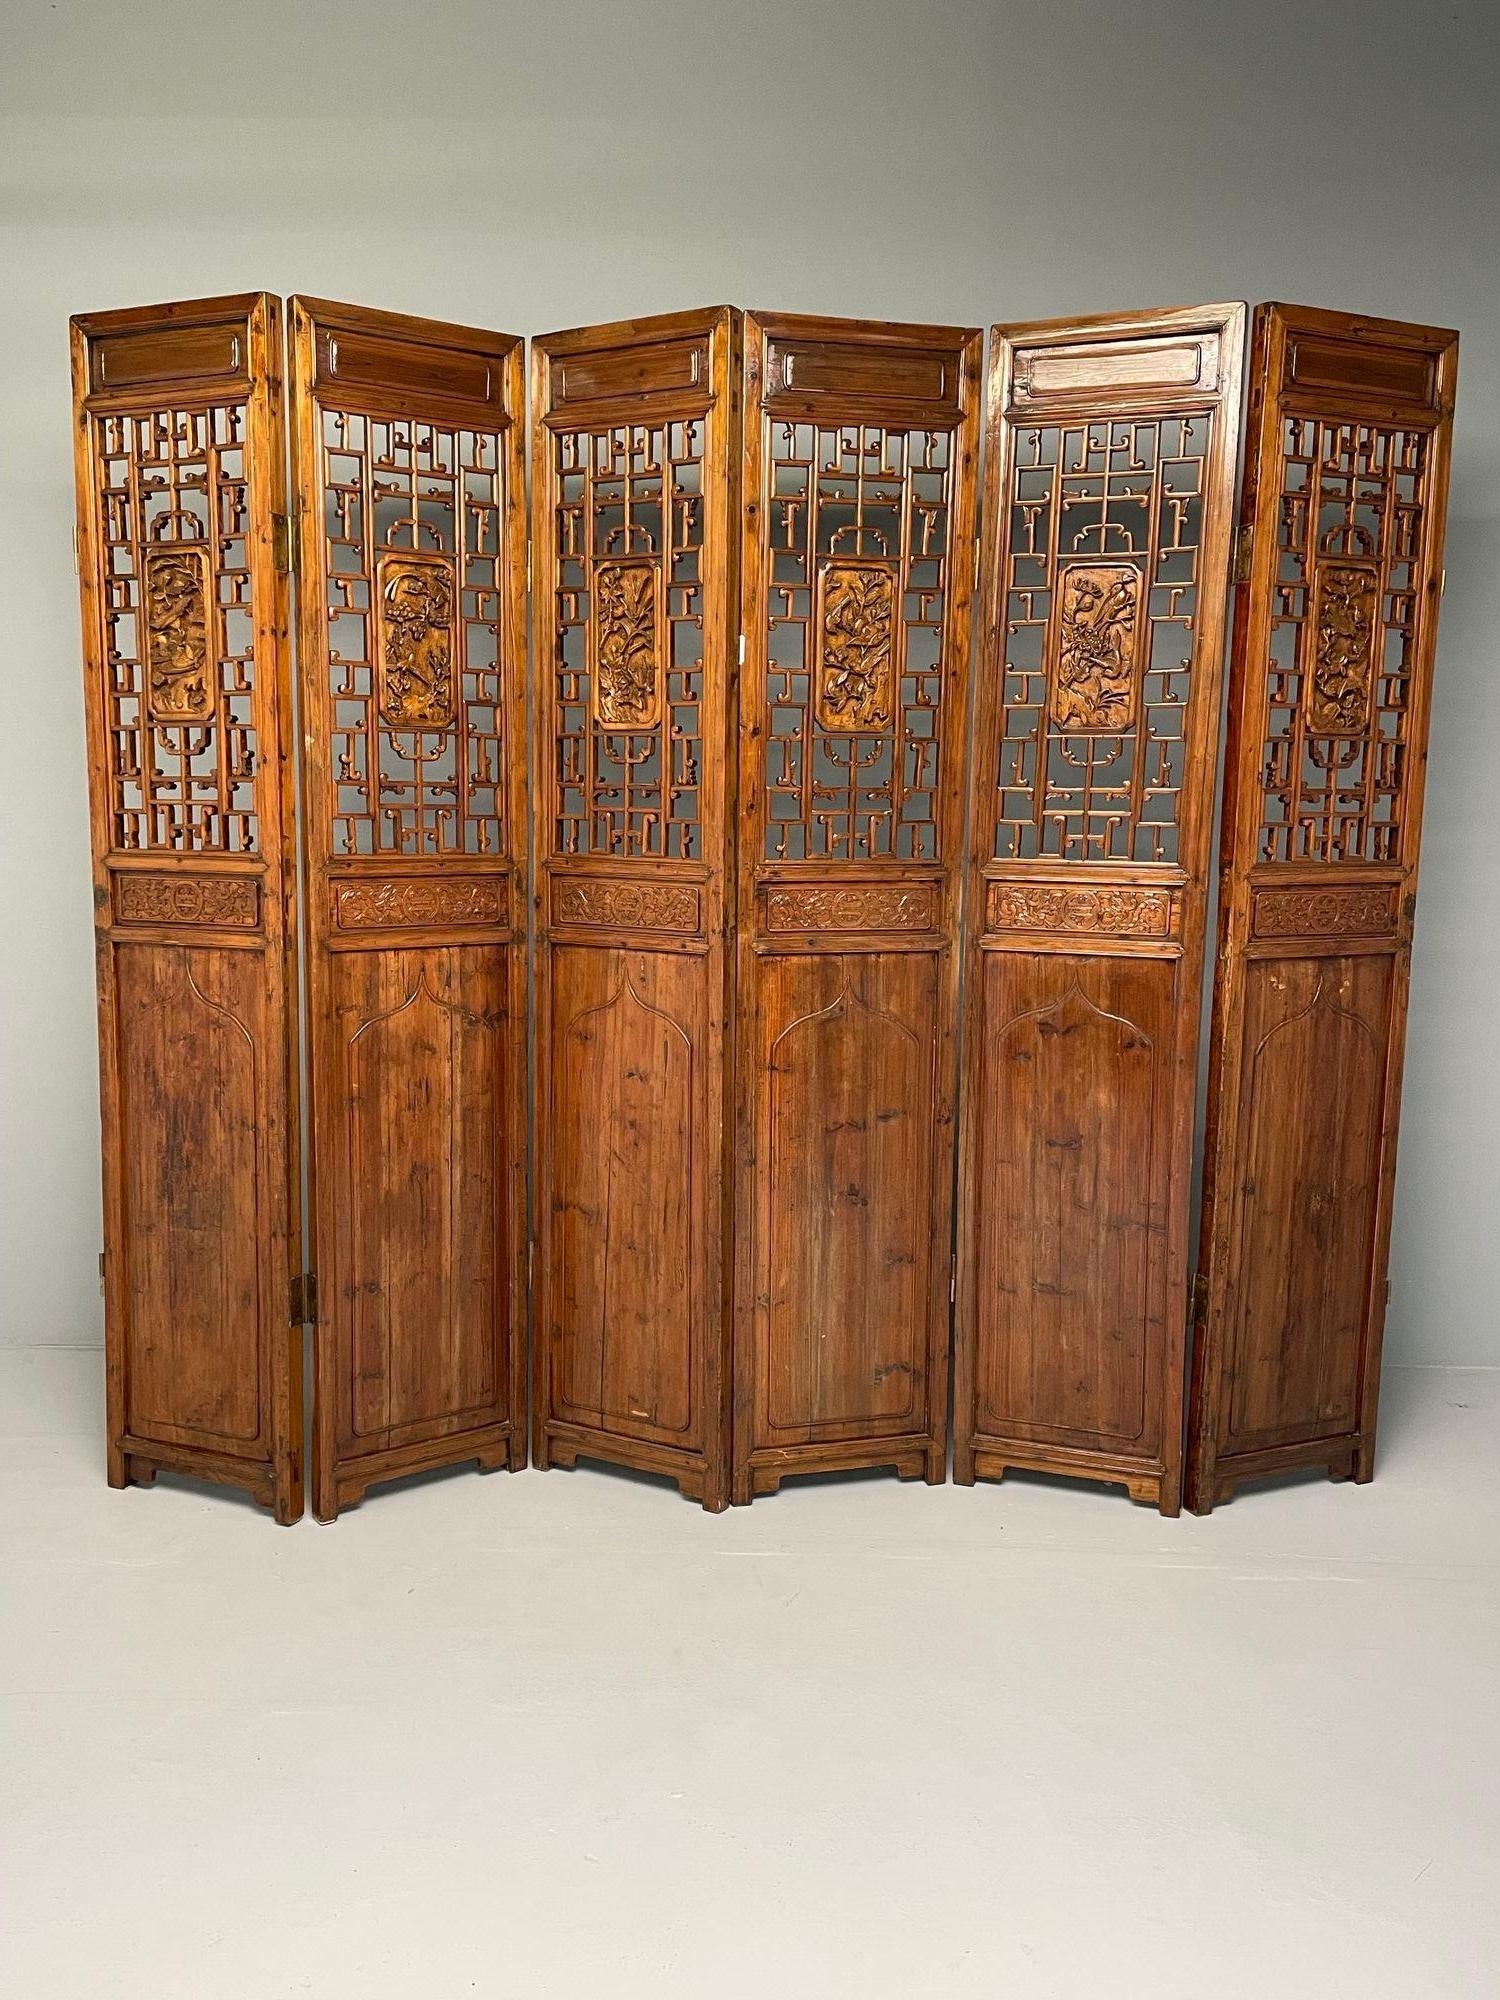 Six-Panel Teak Asian, early 20th Century Folding Screen / Room Divider For Sale 8